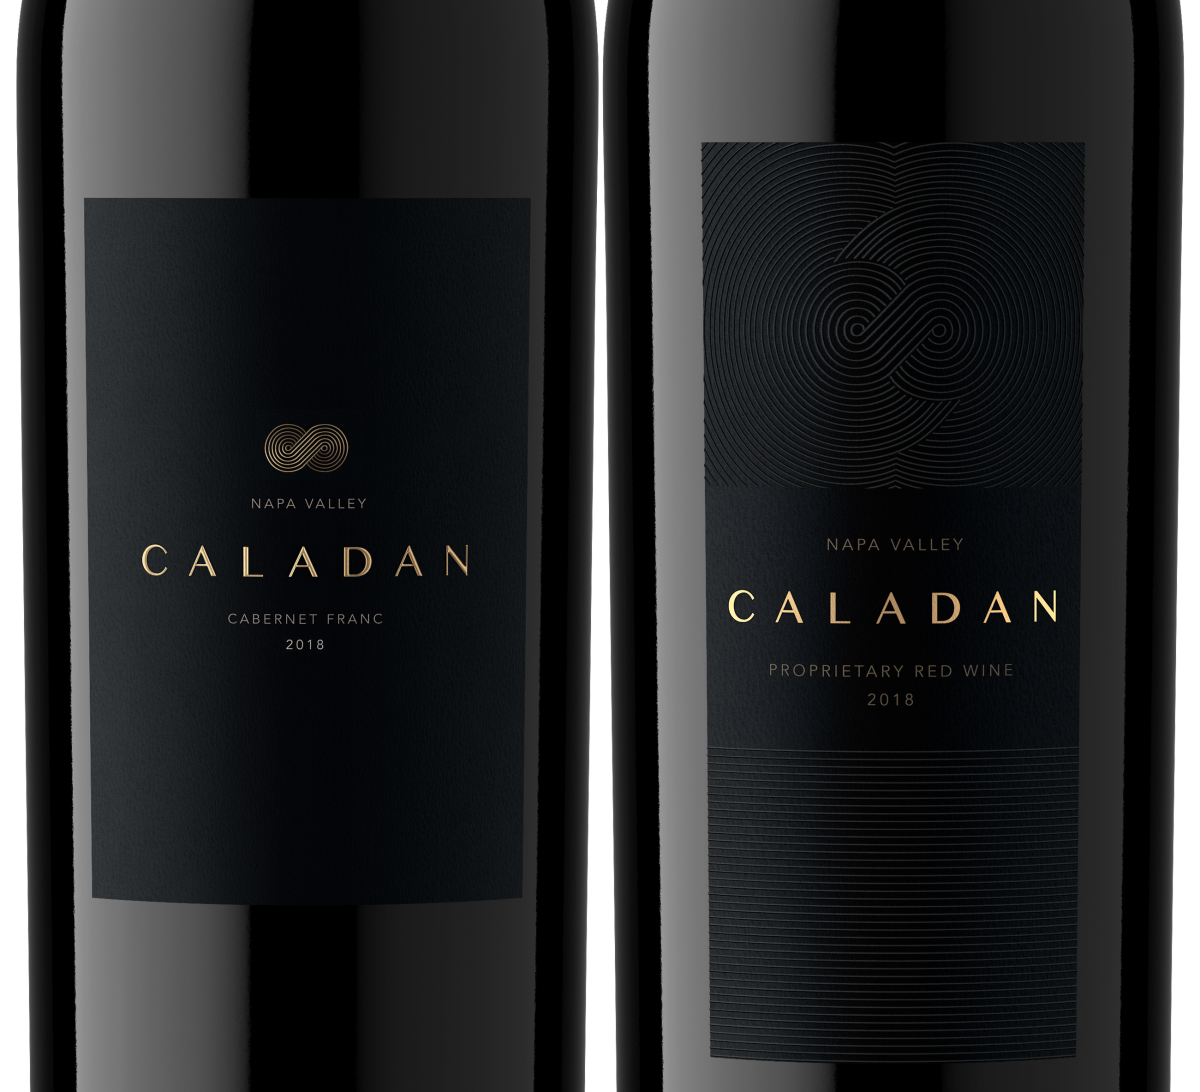 Caladan 2018 Cabernet Franc and 2018 Proprietary Red bottles